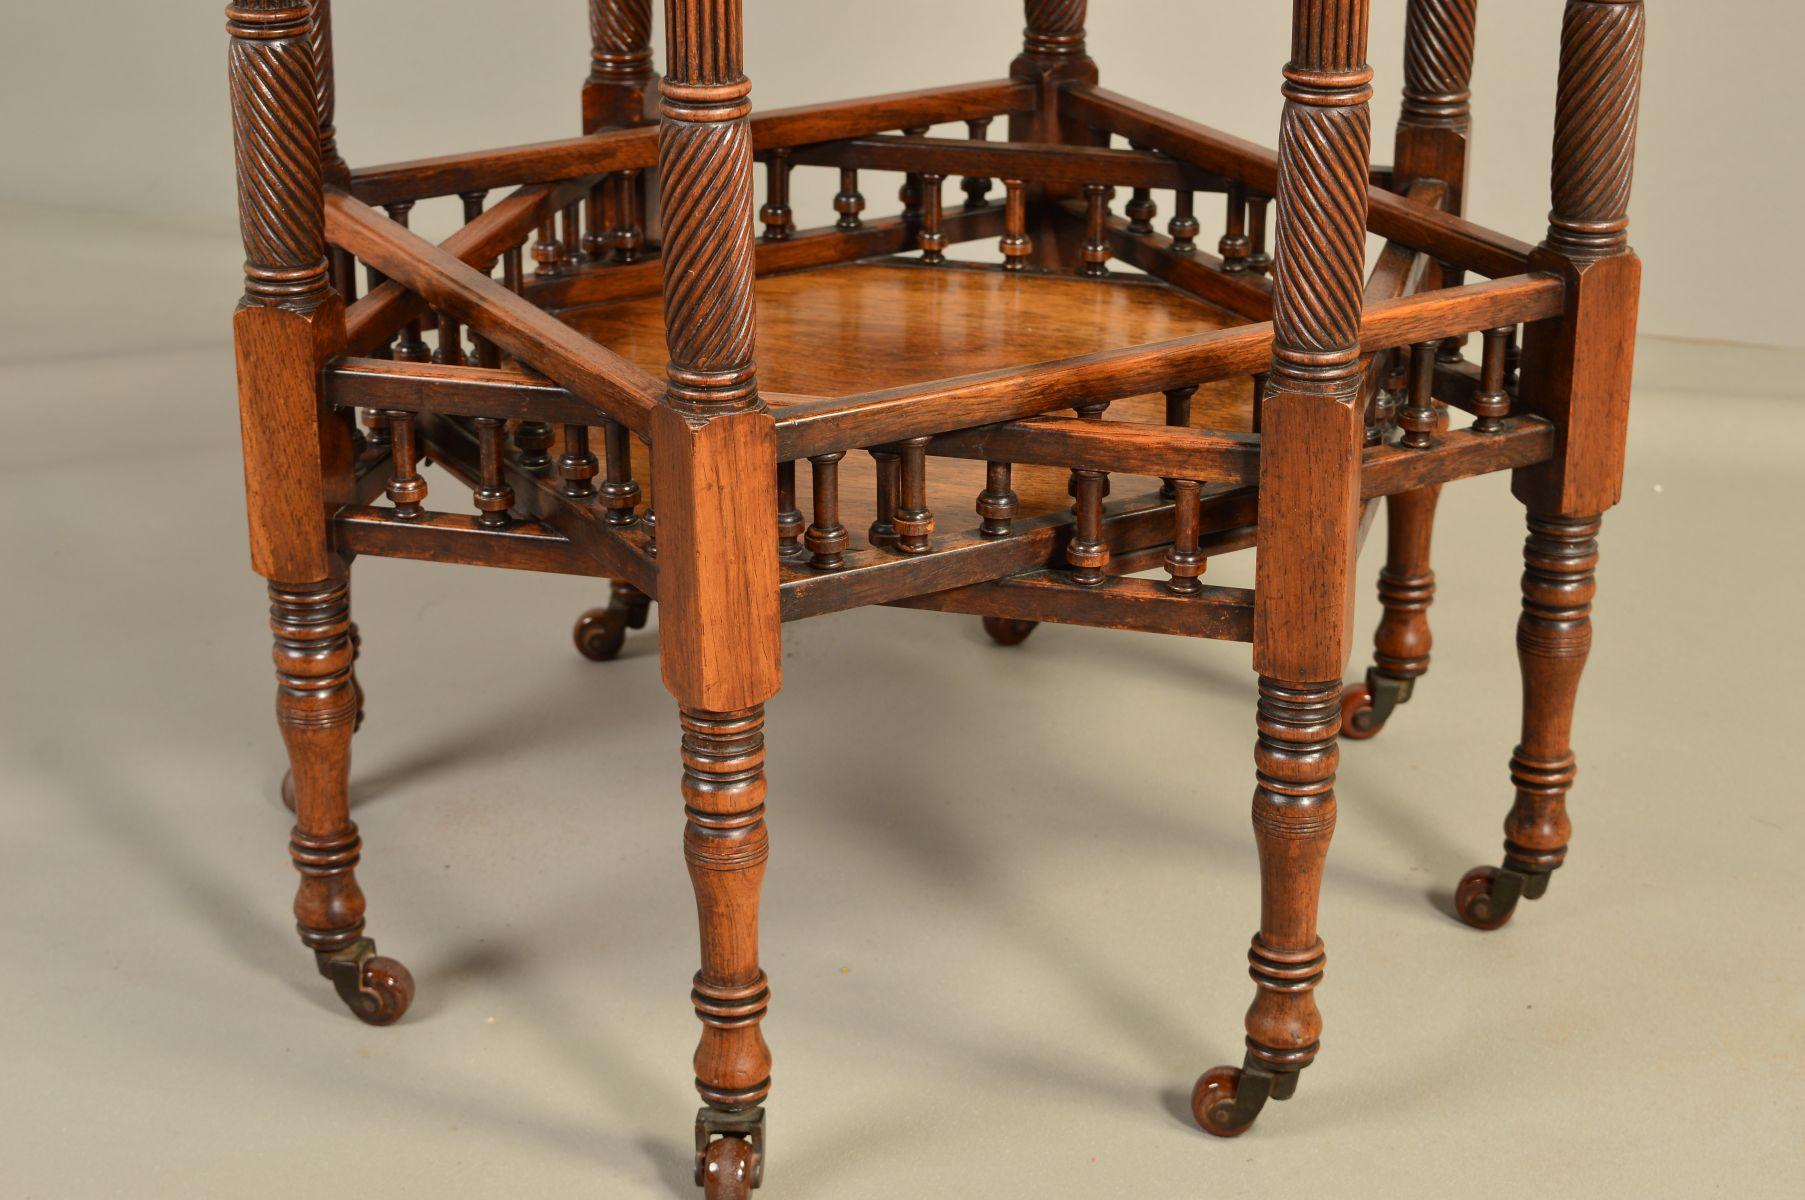 Late 19th Century Gregory & Co Aesthetic Movement Eight Leg Octagonal Library Centre or Side Table